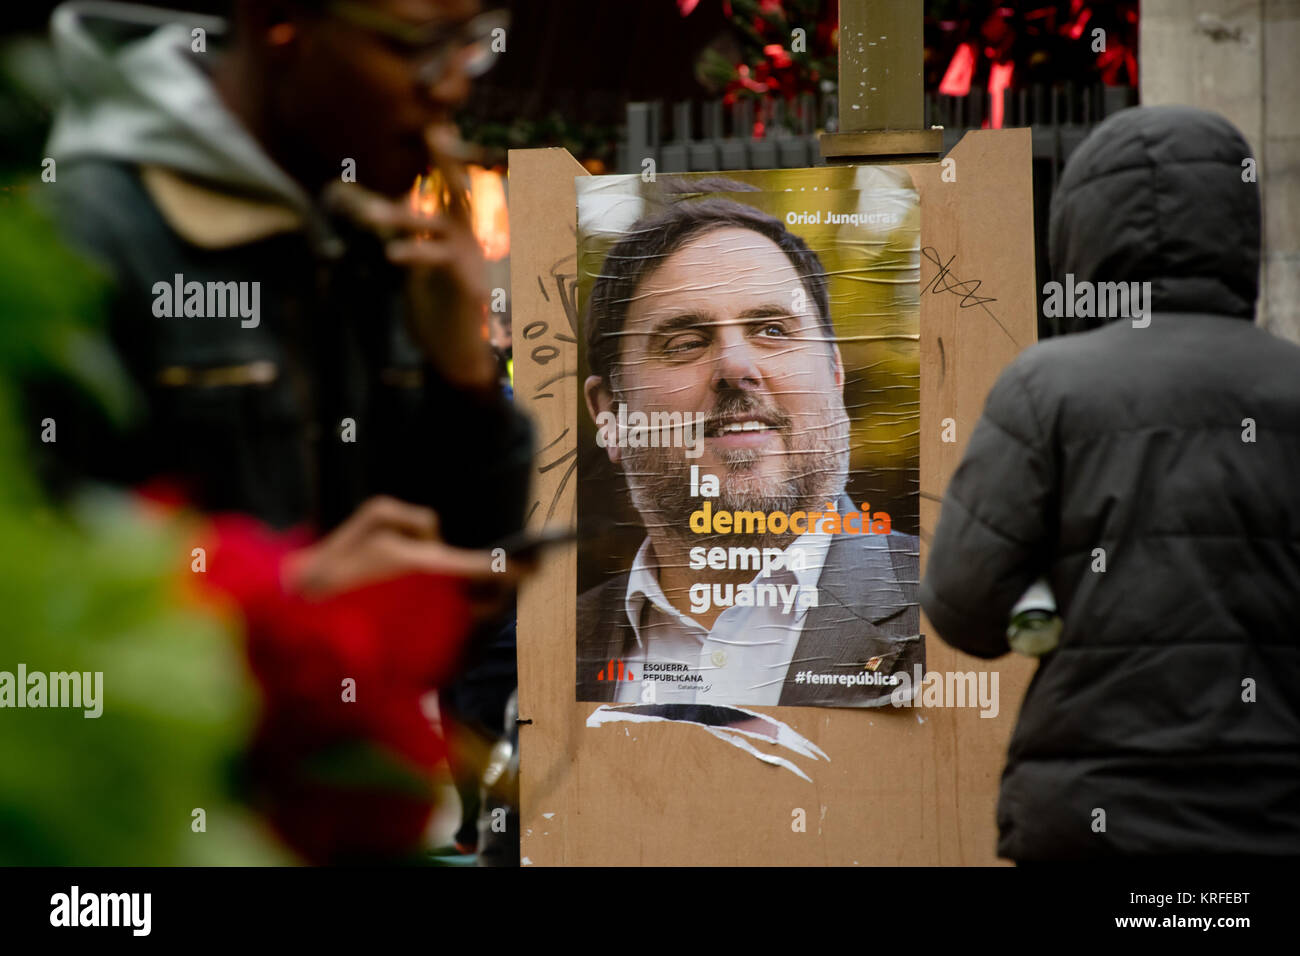 December 18, 2017 - Barcelona, Catalonia, Spain -  An election campaign poster showing former regional vice-president and candidate of ERC party Oriol Junqueras on 18 December 2017 in Barcelona, Spain, ahead of December 21 Catalan regional vote. Oriol Junqueras stays in prison accused of rebellion, sedition and embezzlement for Catalonian pro-independence process. Catalonia will vote in regional elections Thursday, two months after separatist campaigners tried to declare independence from Madrid. Many of the leaders of the secessionist movement were arrested and Spanish government took control Stock Photo